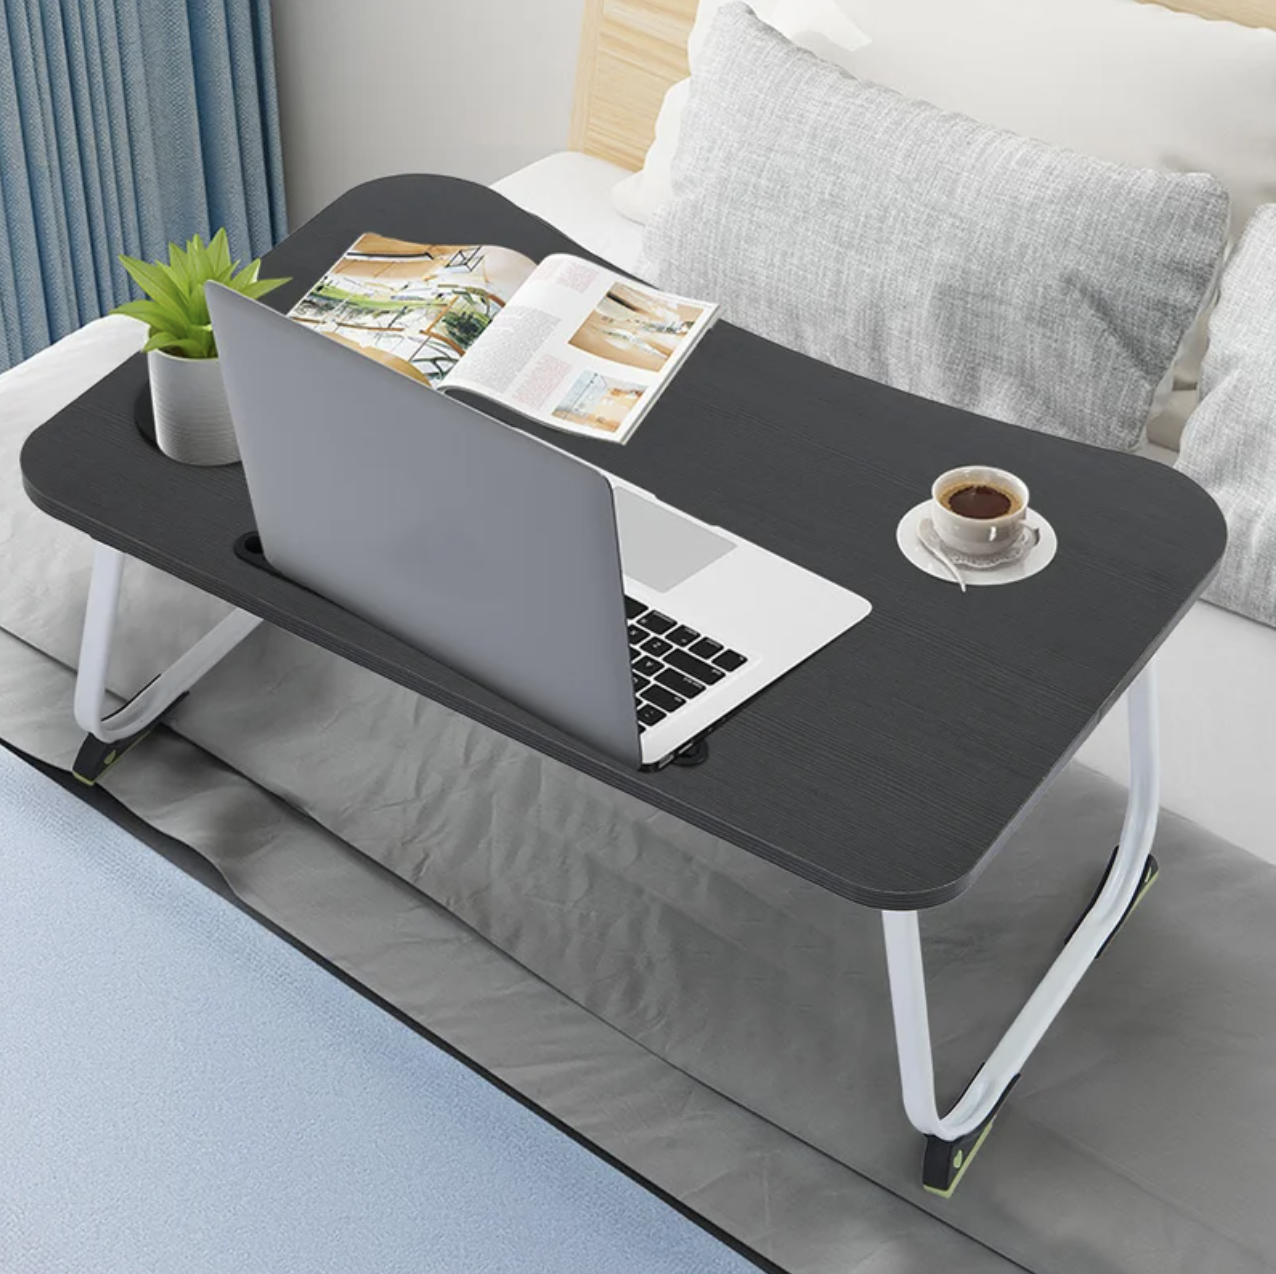 the foldable bed tray holding a laptop and a cup of coffee